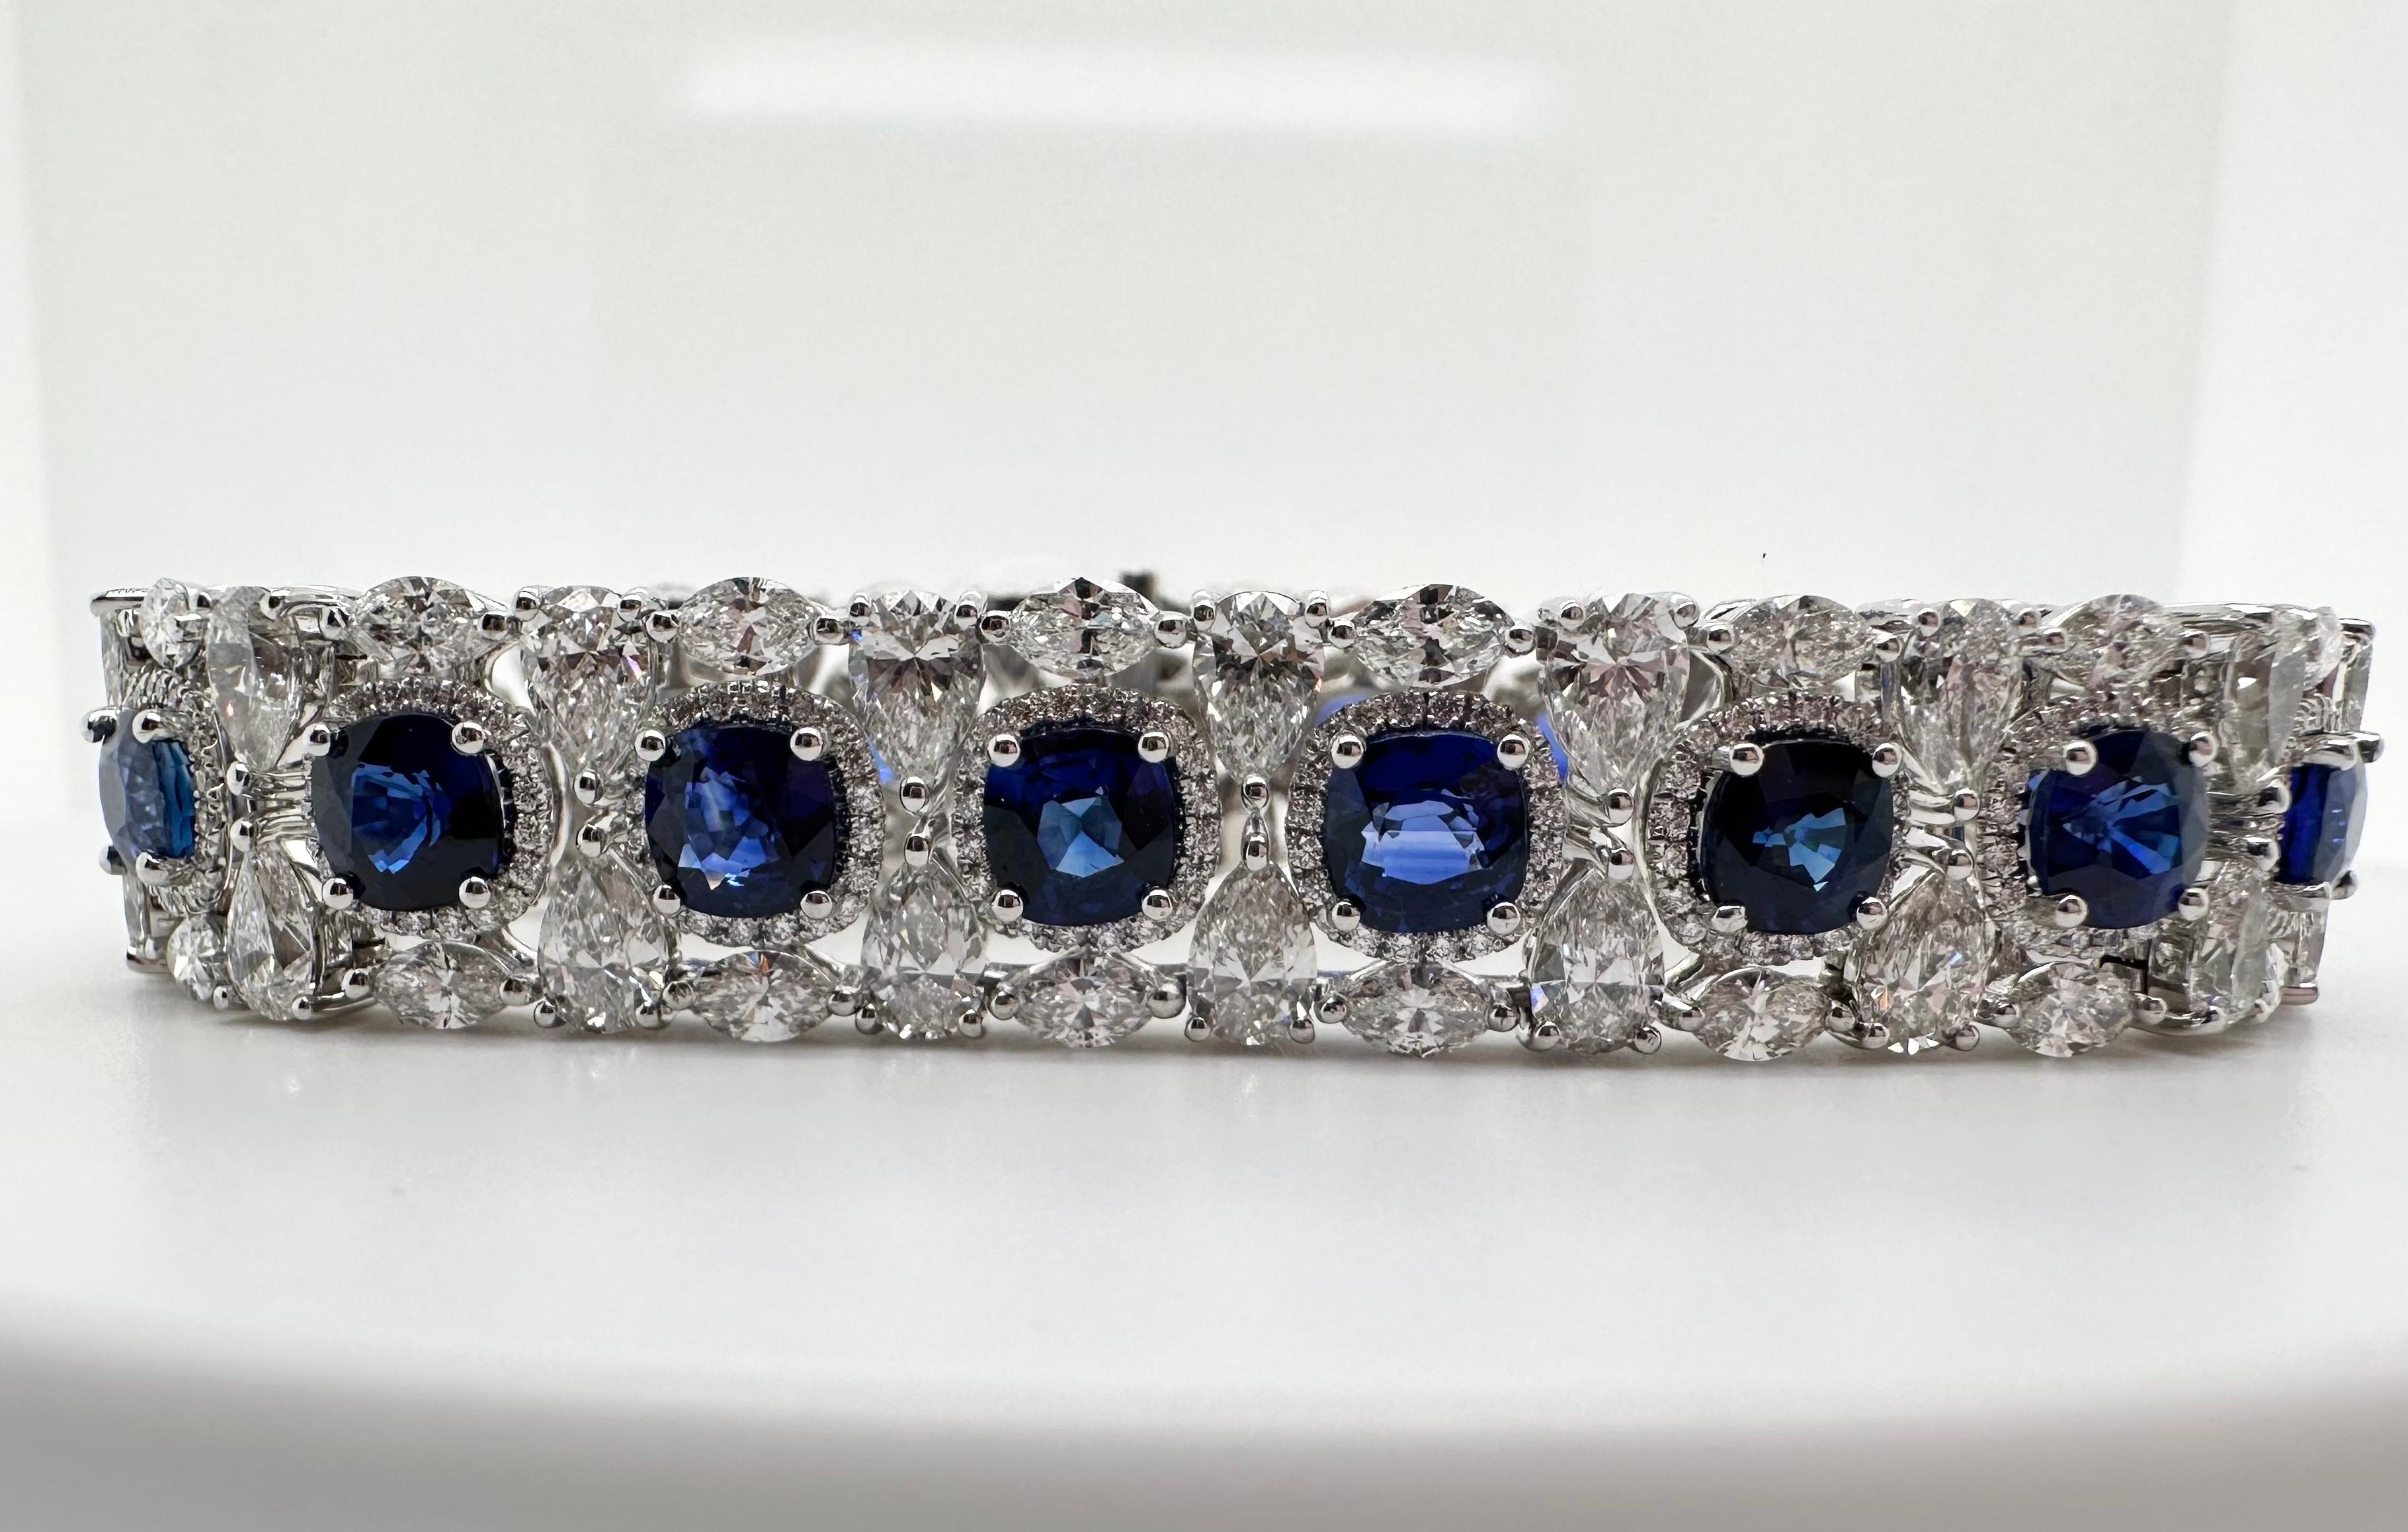 Well crafted sapphire and diamond bracelet with matching Ceylon sapphires and diamonds in 18KT white gold, exquisite craftsmanship throughout!

Metal Type: 18KT
Gram Weight:46.40 grams 

Natural Sapphire(s):
Color: Blue
Cut:Cushion
Carat: